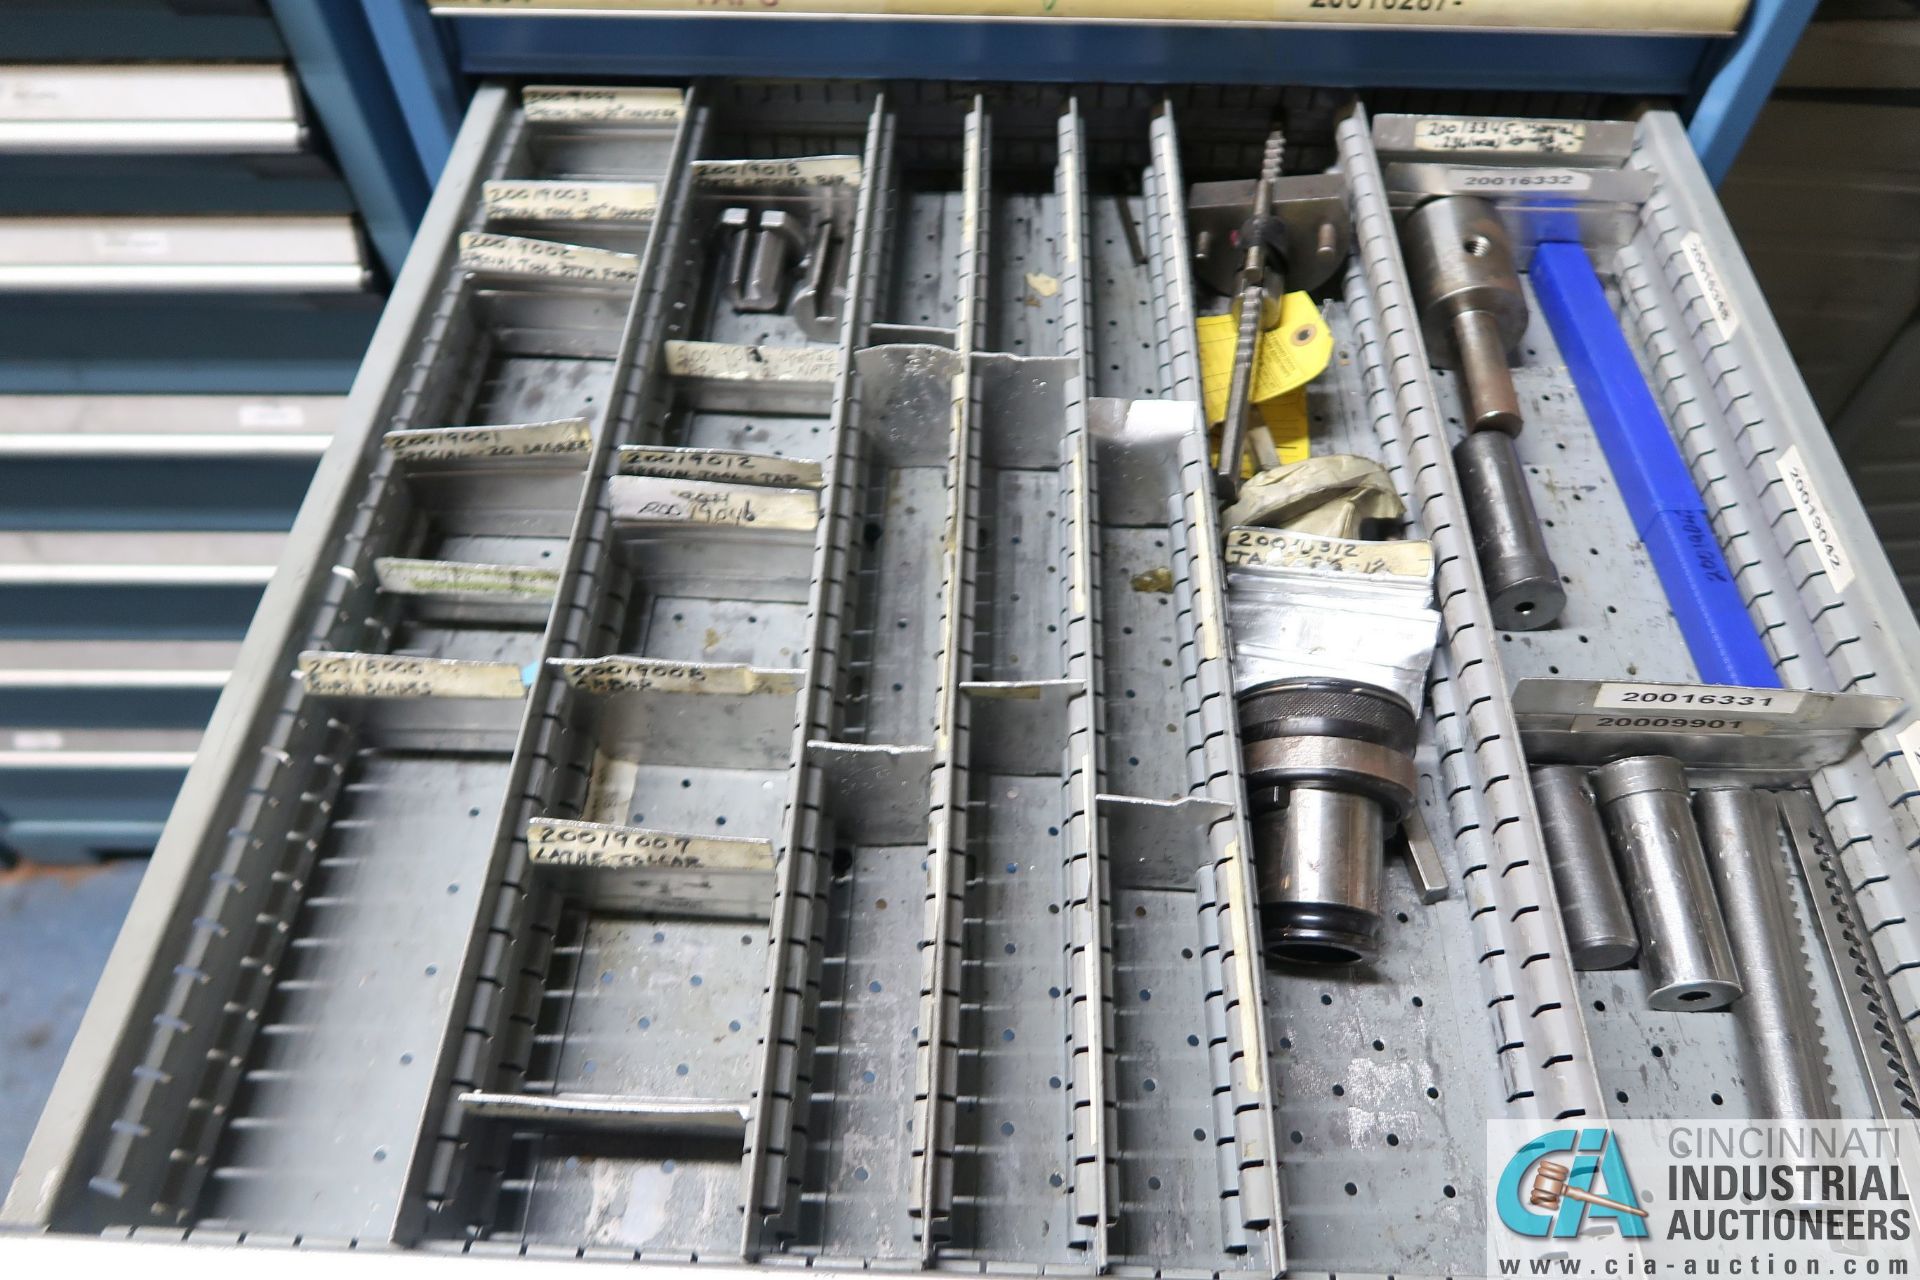 14-DRAWER ROUSSEAU TOOLING CABINET AND CONTENTS WITH CHAMFER TOOLING, HARDWARE PLUGS, AND REPAIR - Image 5 of 13